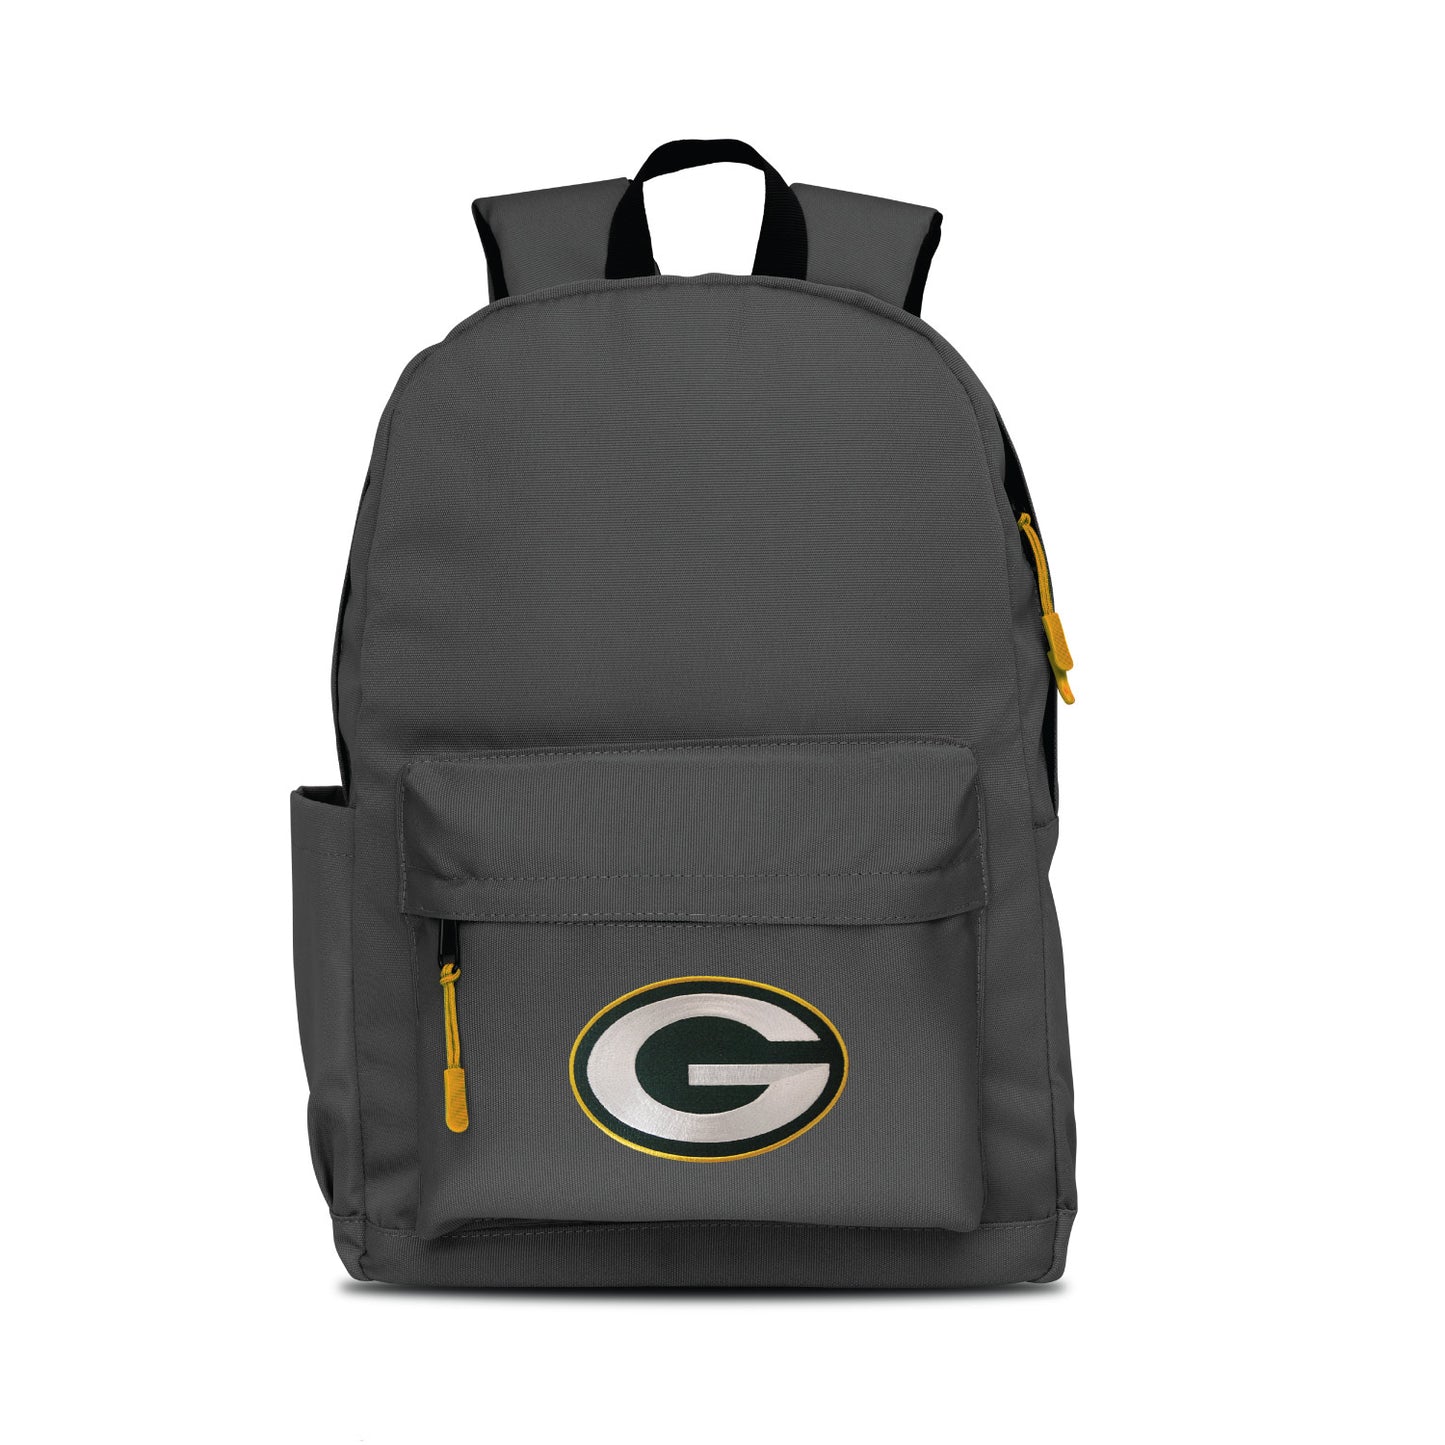 Green Bay Packers Campus Laptop Backpack